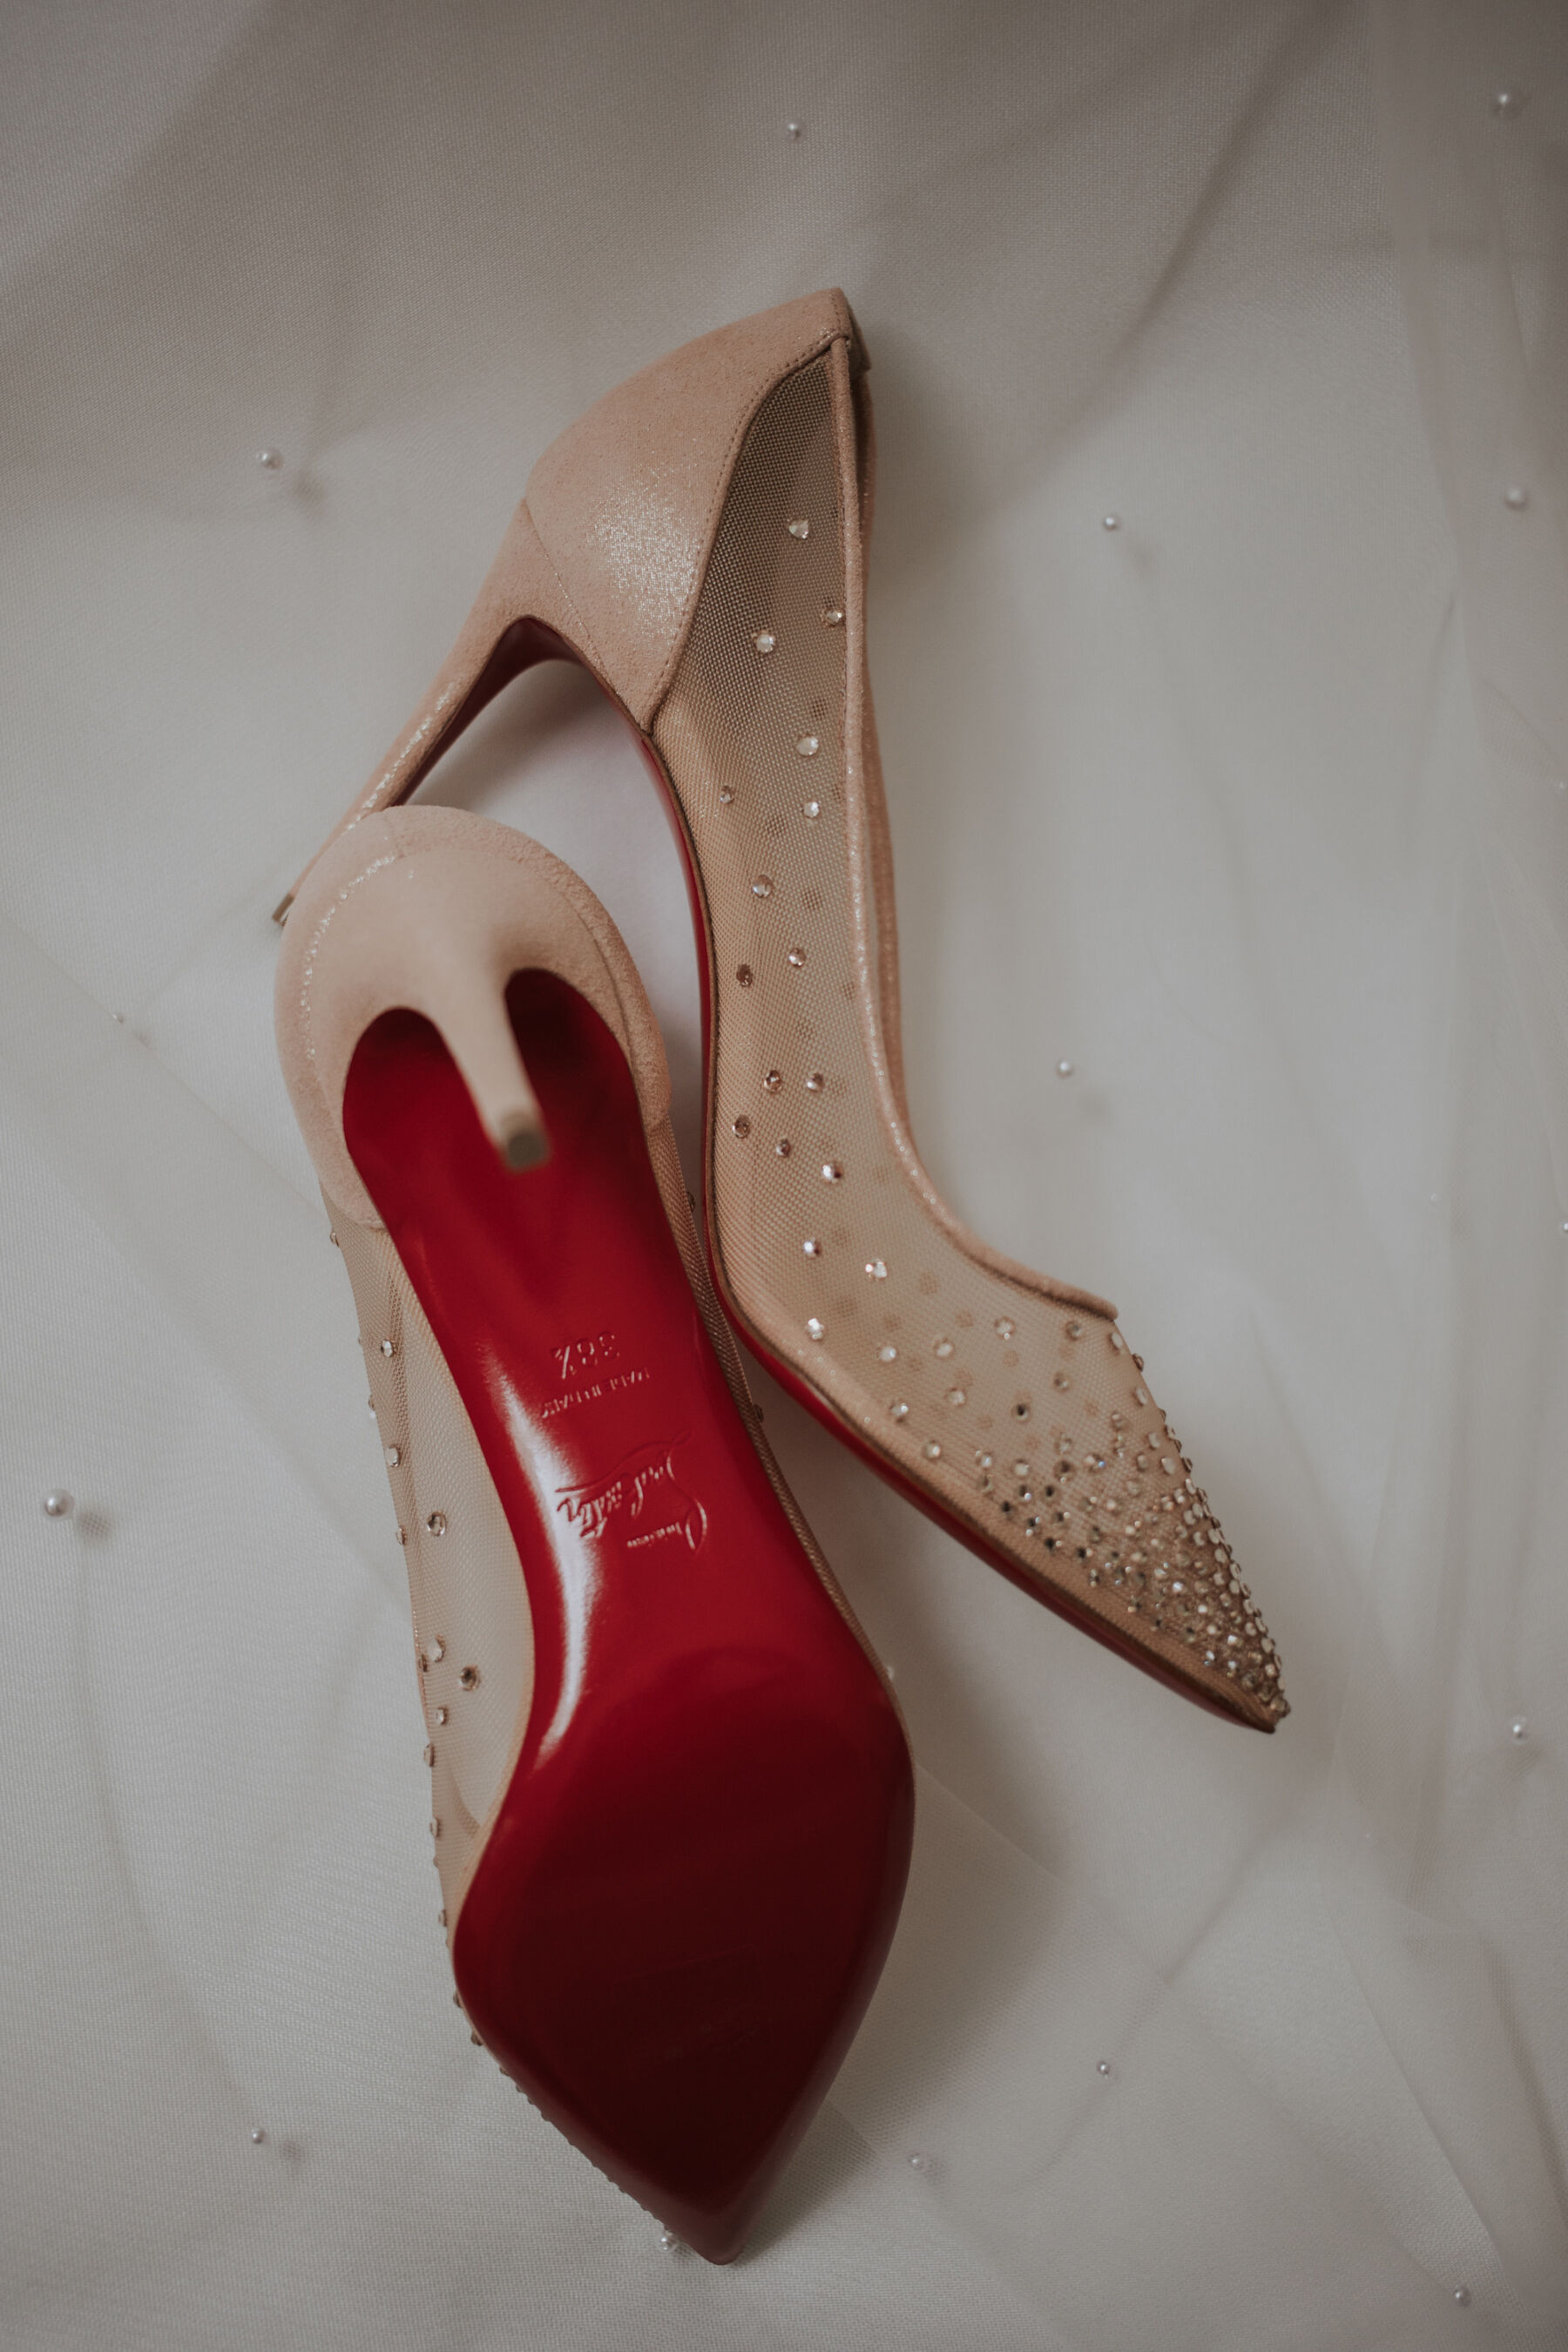 Red sole Louboutin weddin gshoes.